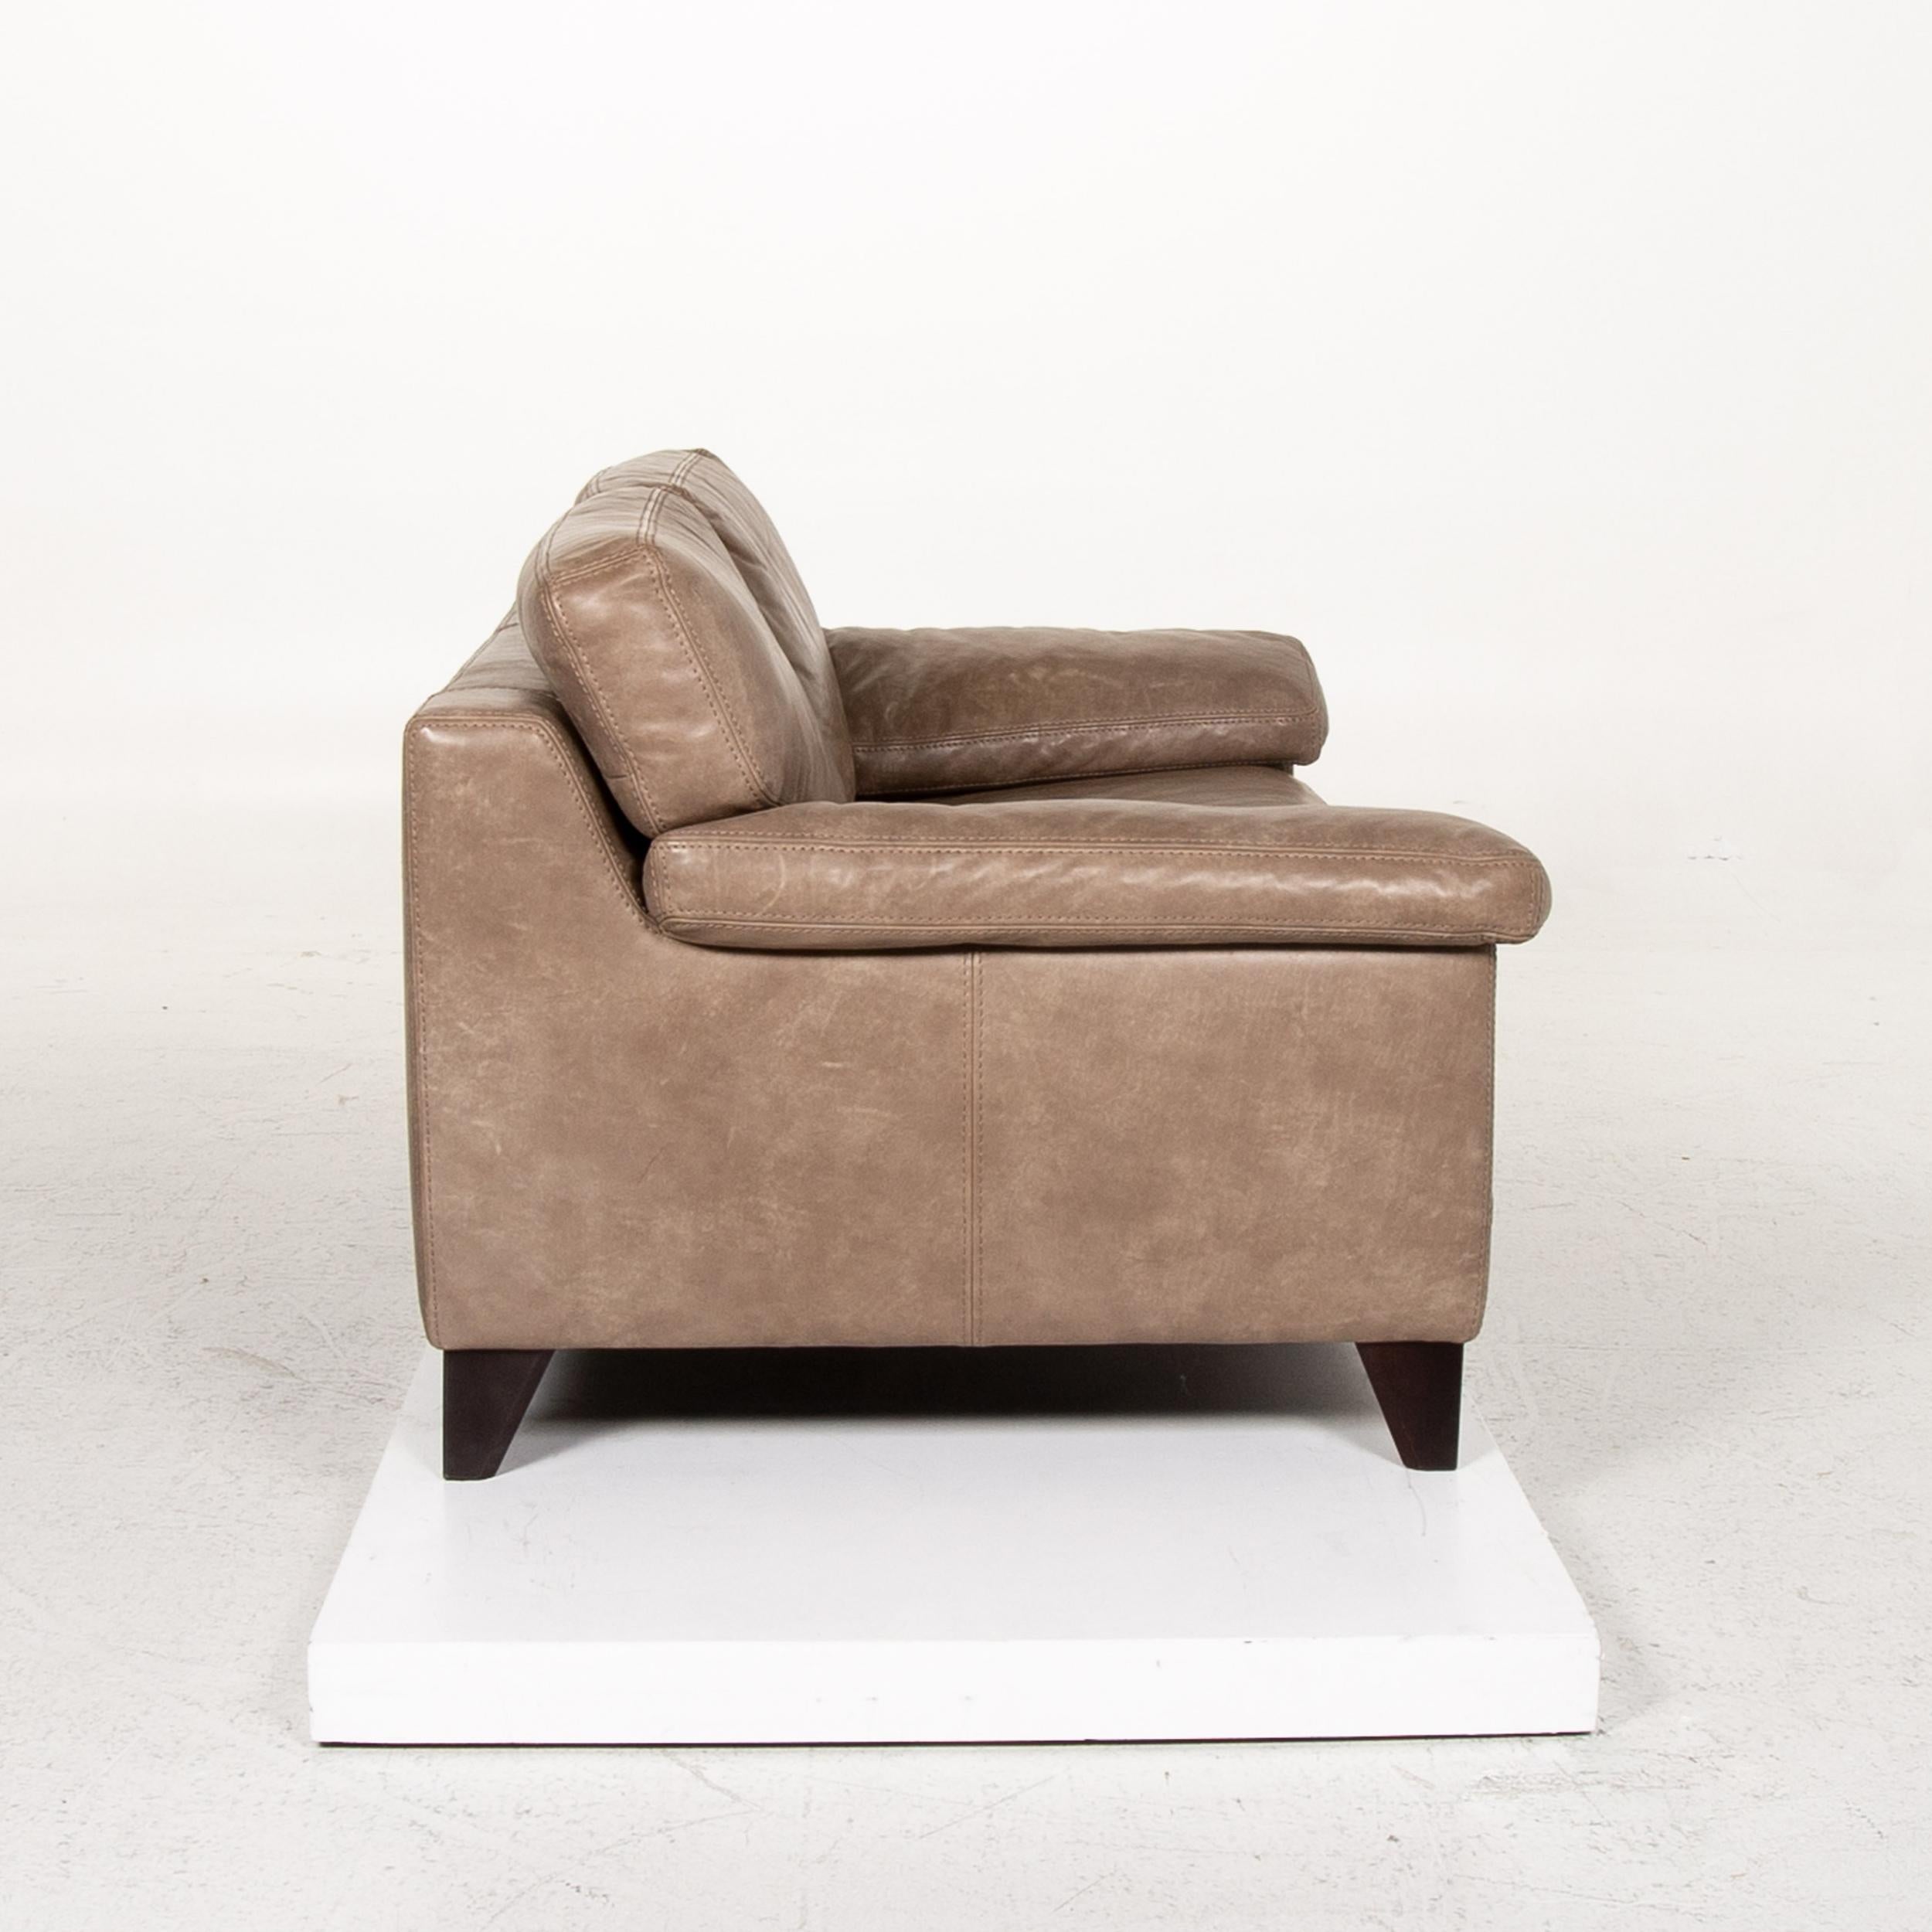 Contemporary Machalke Diego Leather Sofa Brown Two-Seat Couch Teun Van Zanten For Sale